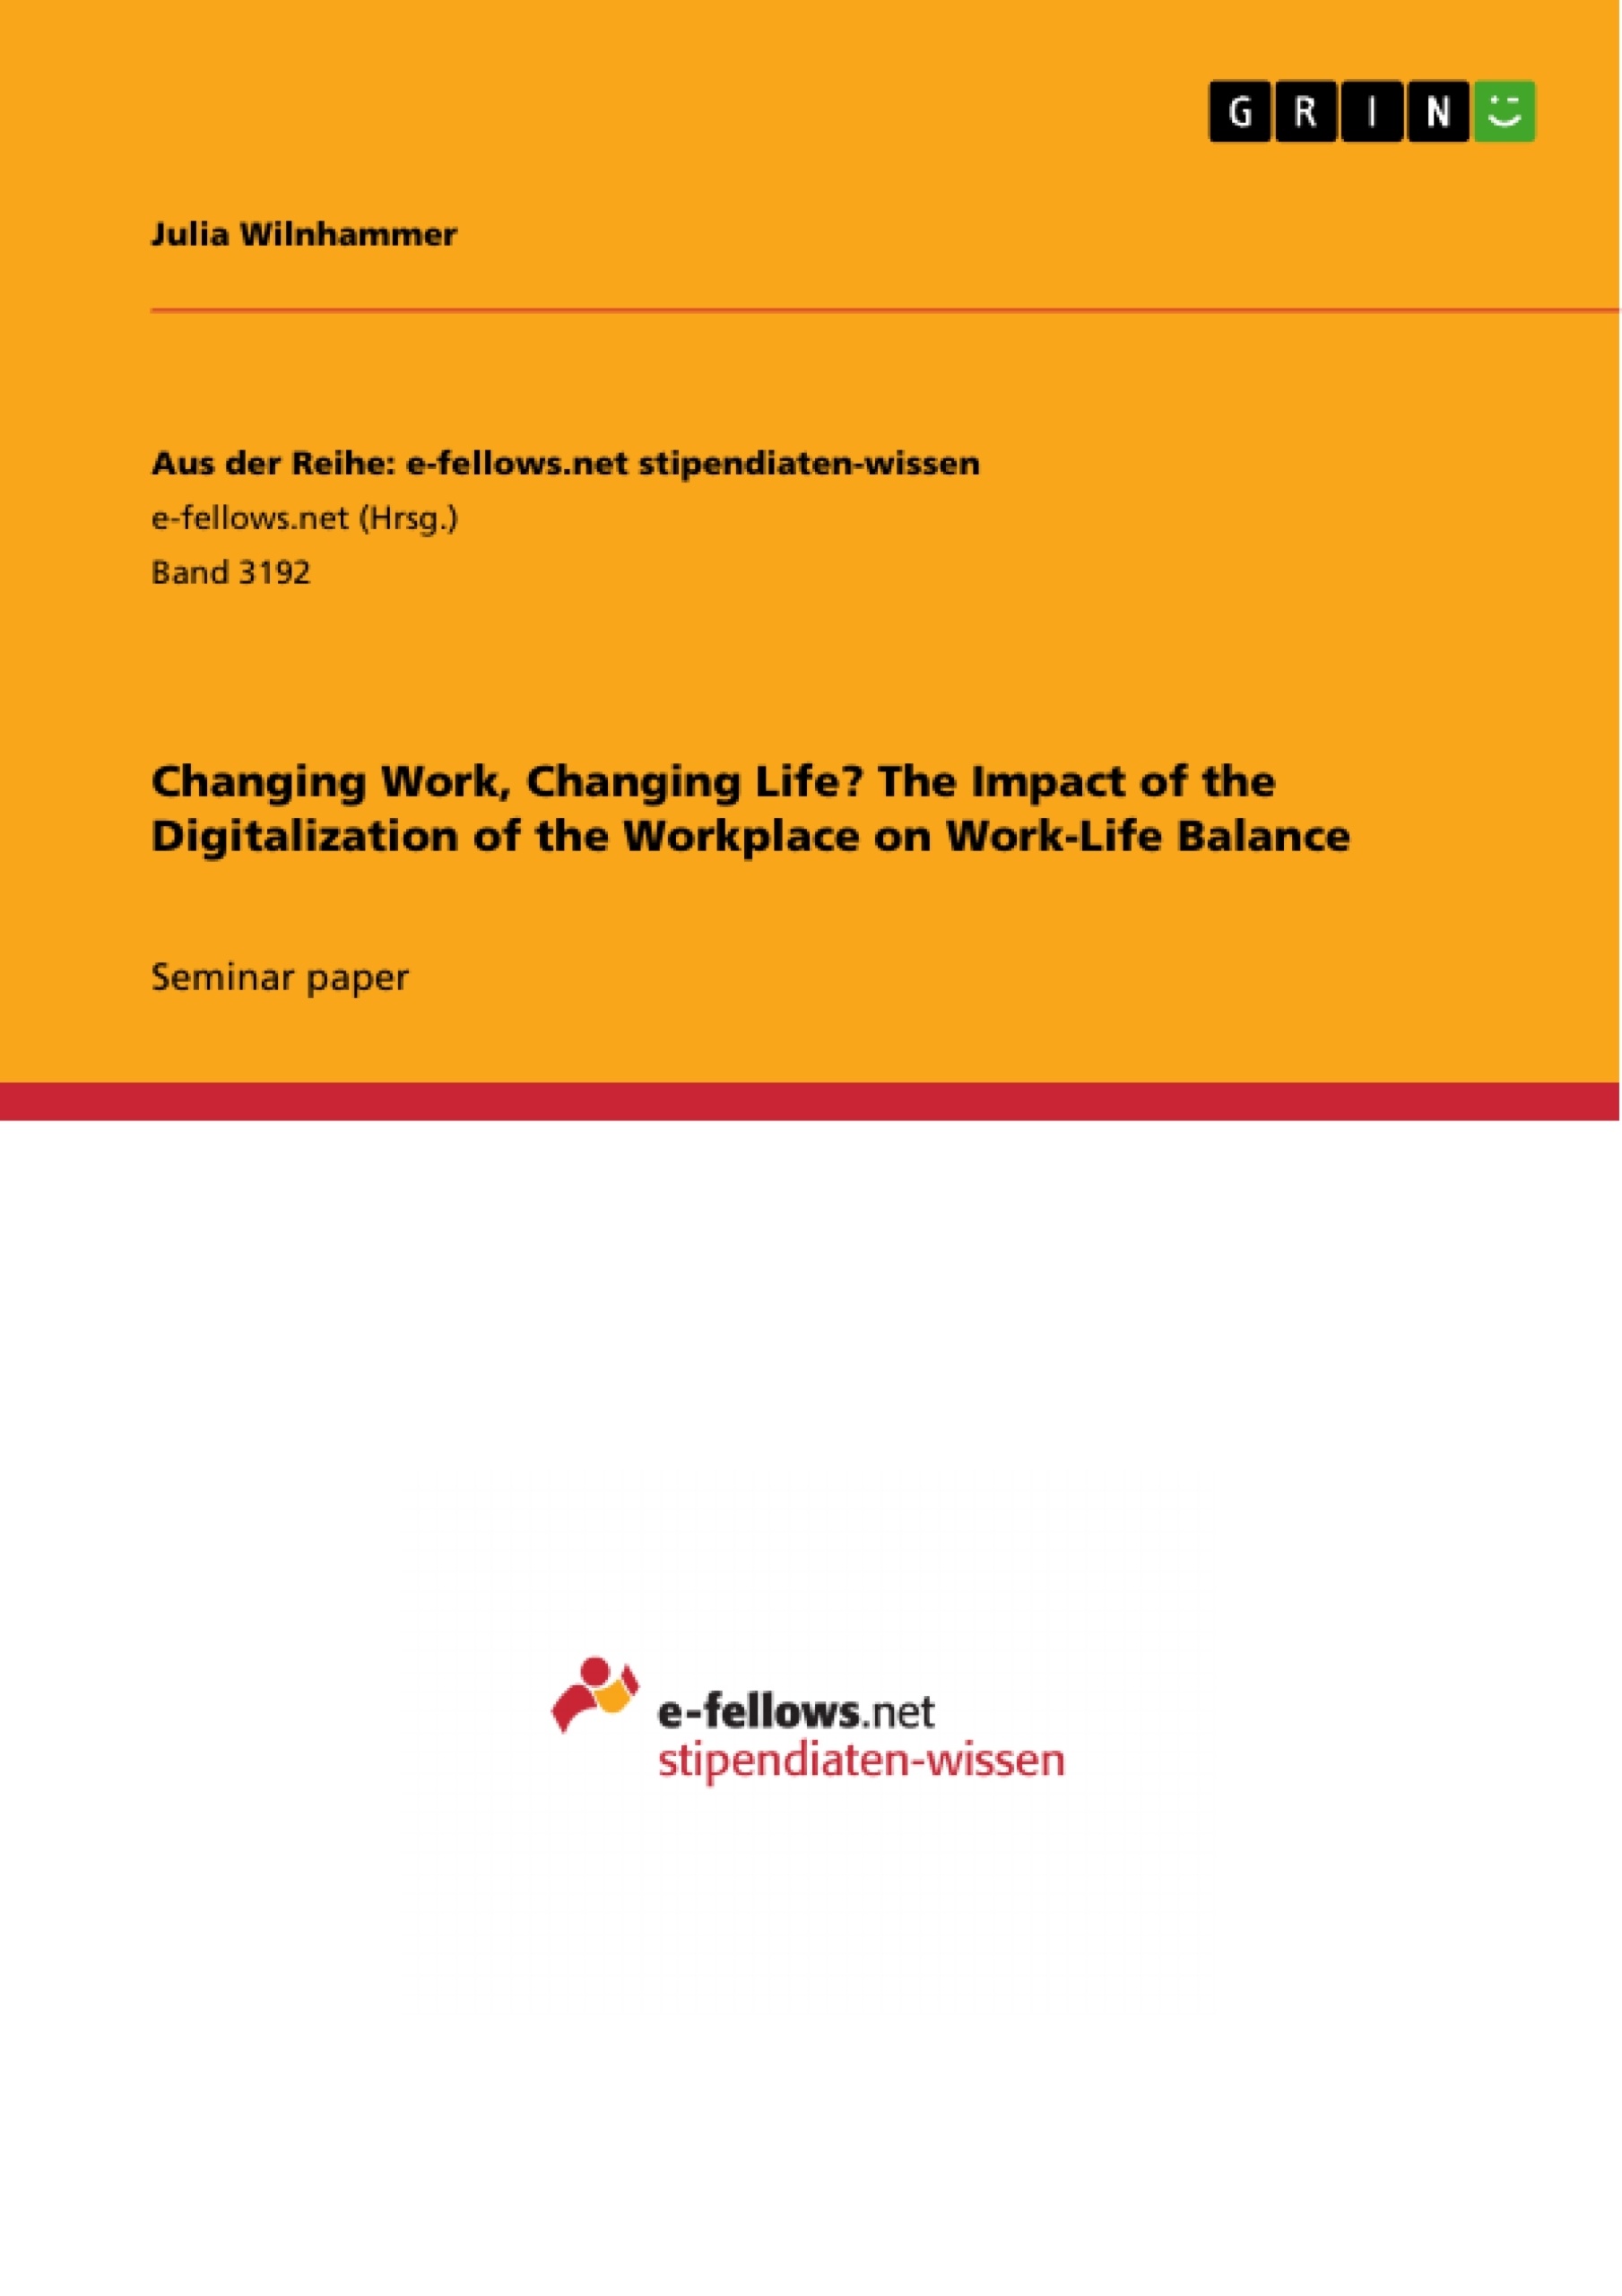 Titre: Changing Work, Changing Life? The Impact of the Digitalization of the Workplace on Work-Life Balance